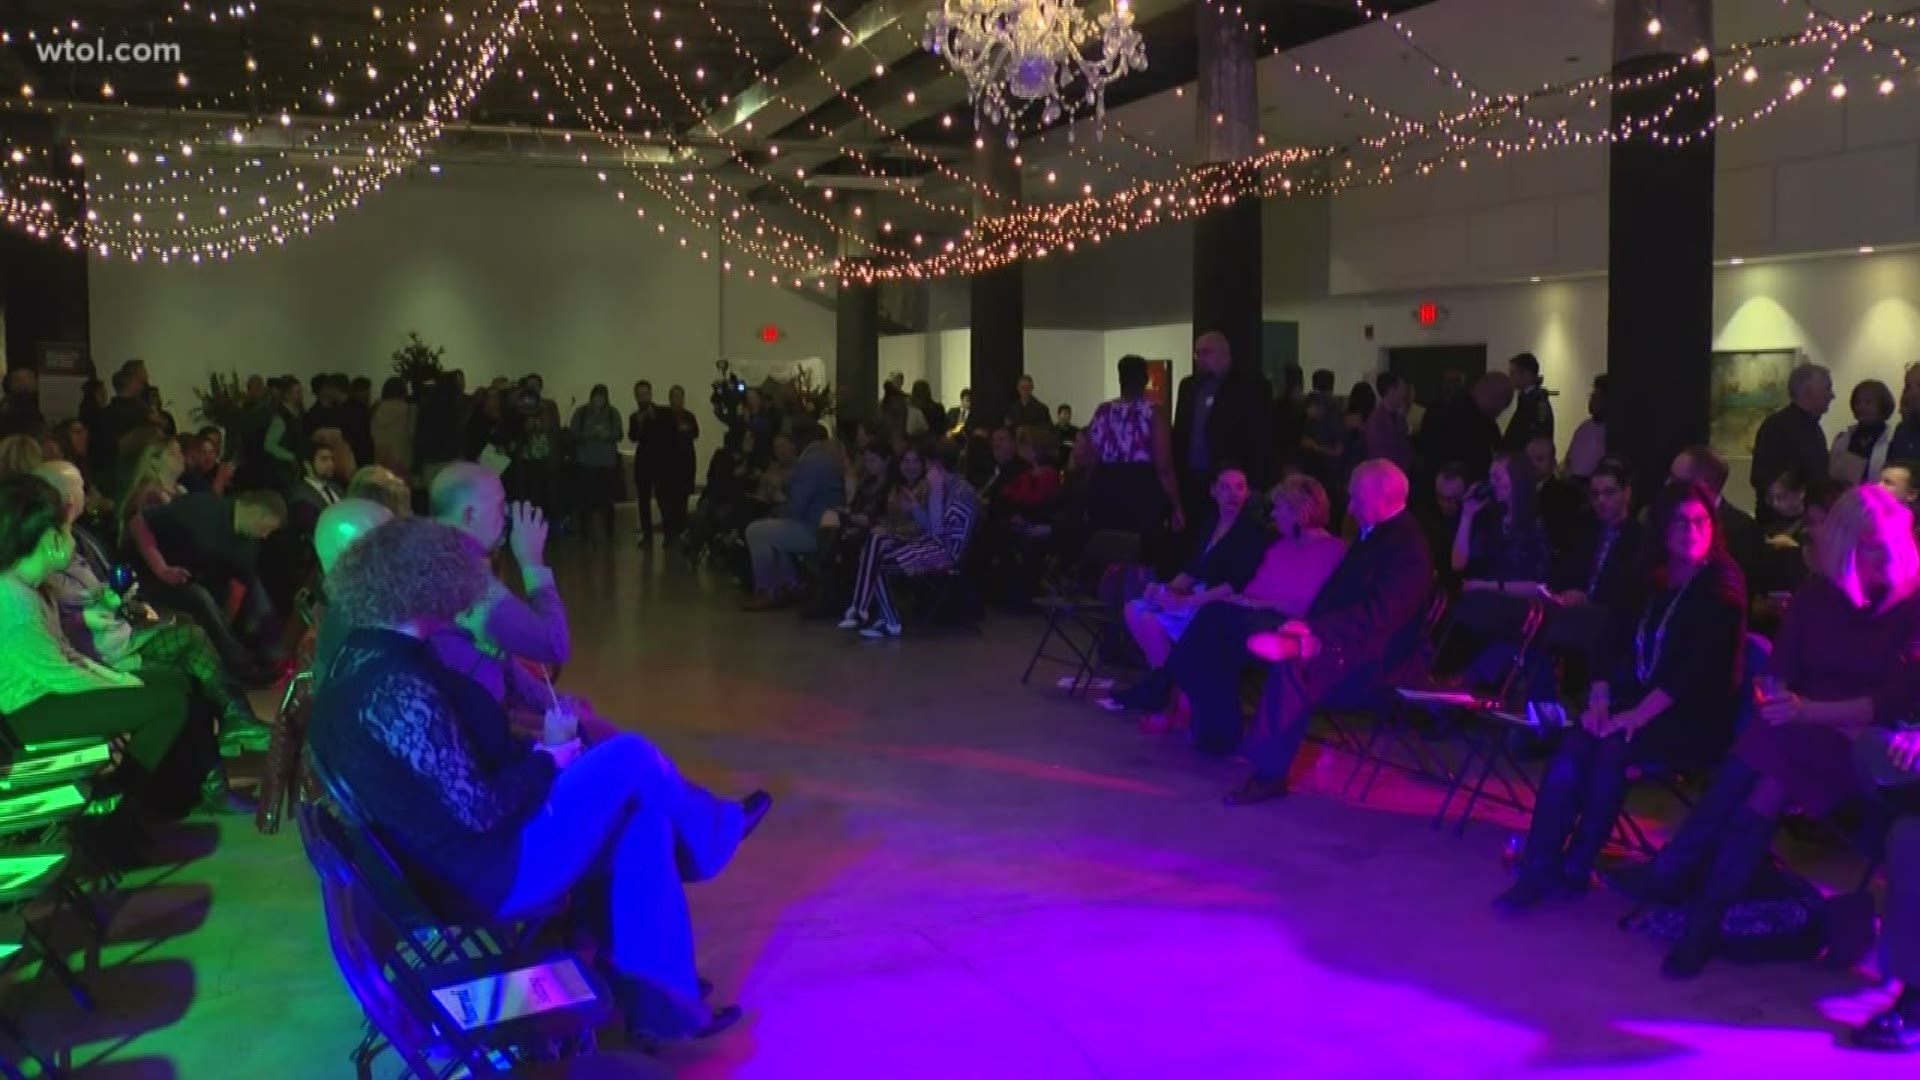 The first Flaunt fashion show hopes to raise awareness for Equality Toledo's mission for LGBTQ issues in the community.